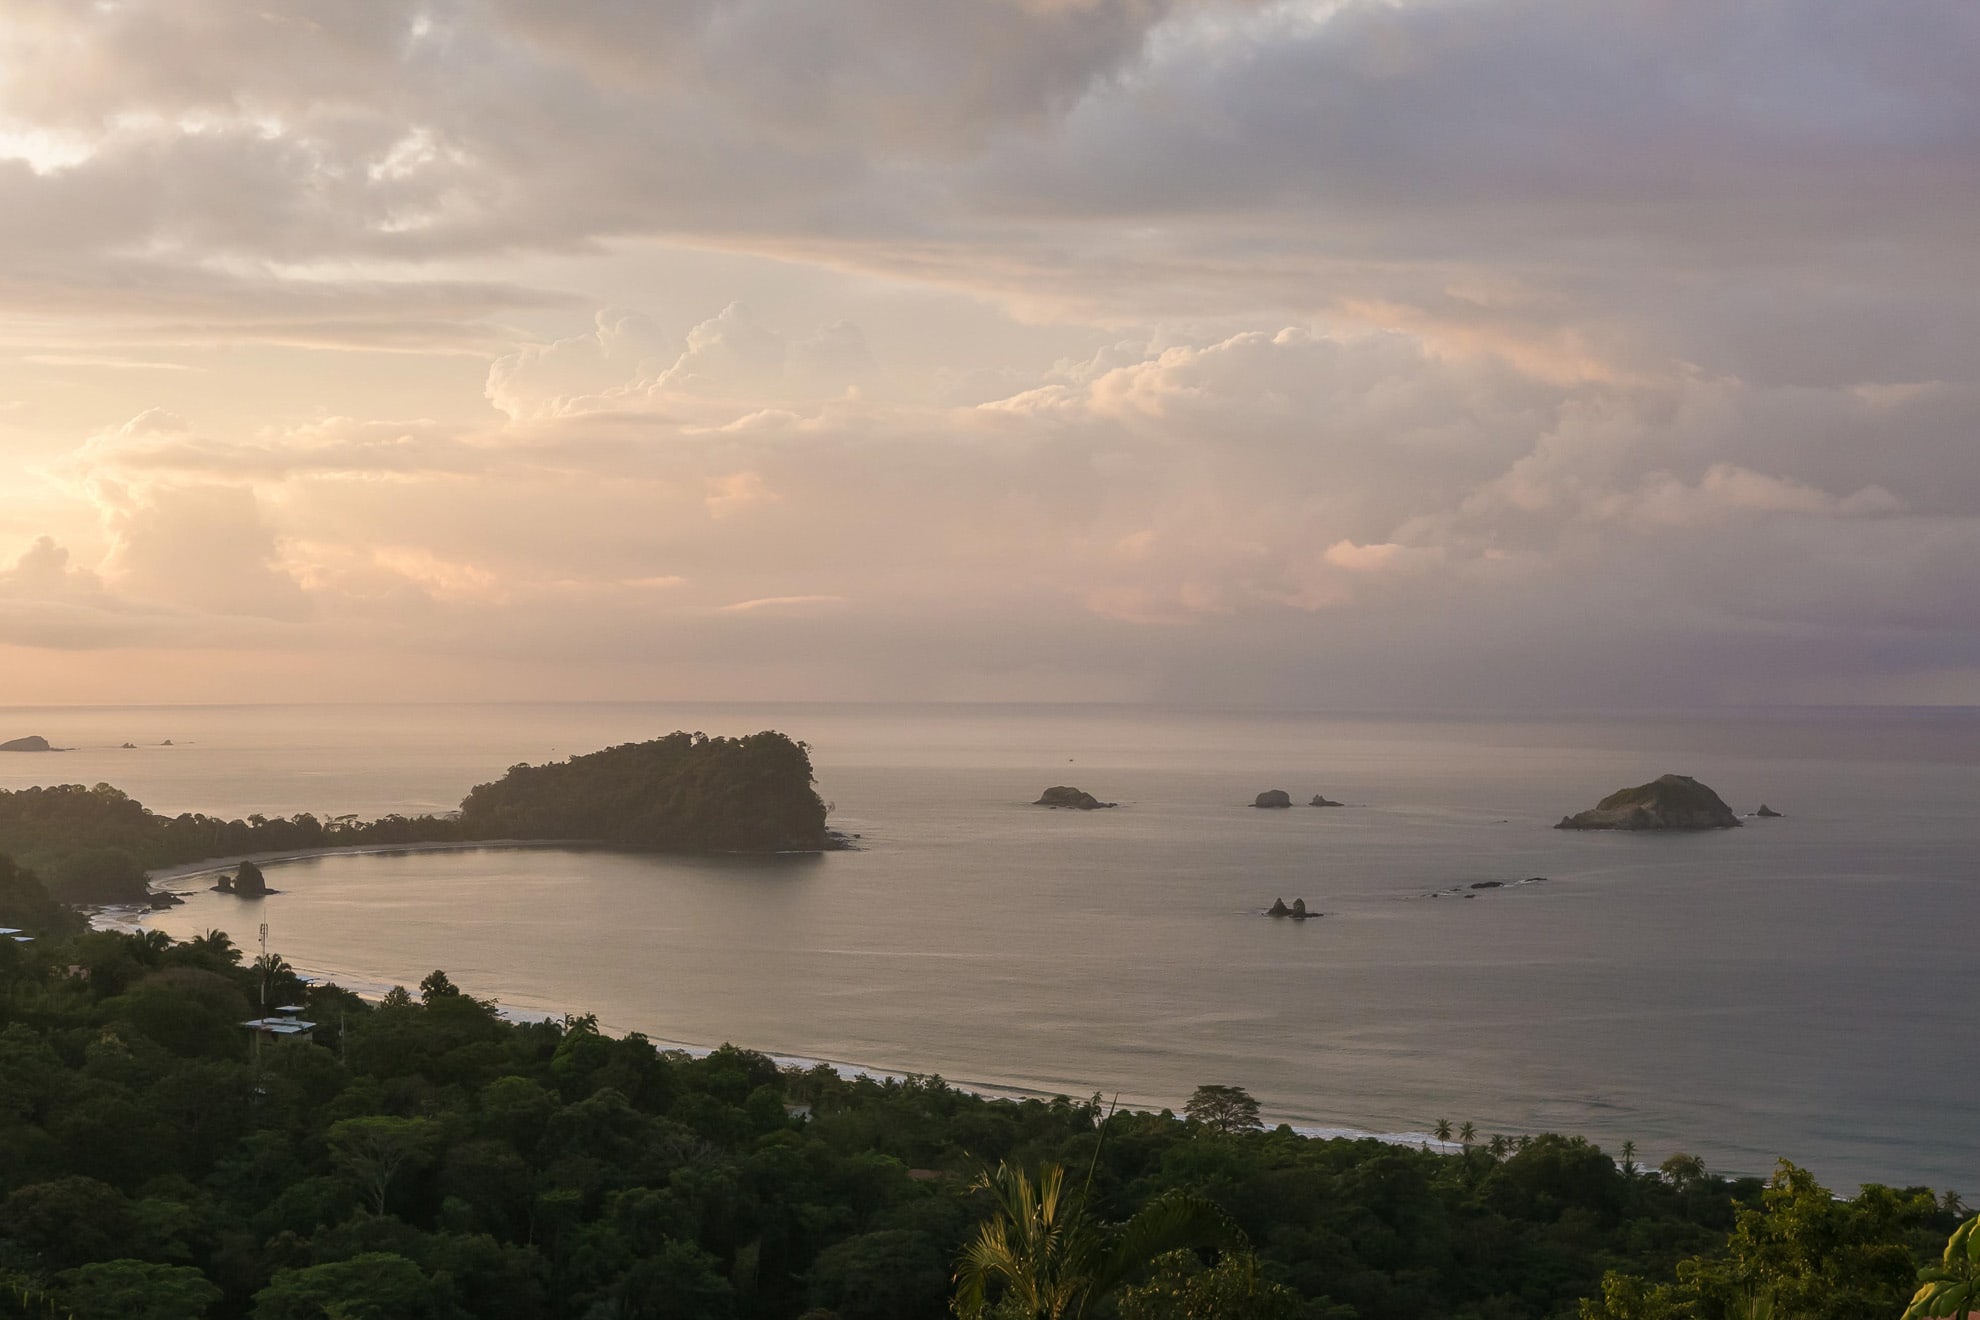 From outdoor wedding venues you get views like this sunrise in Manuel Antonio